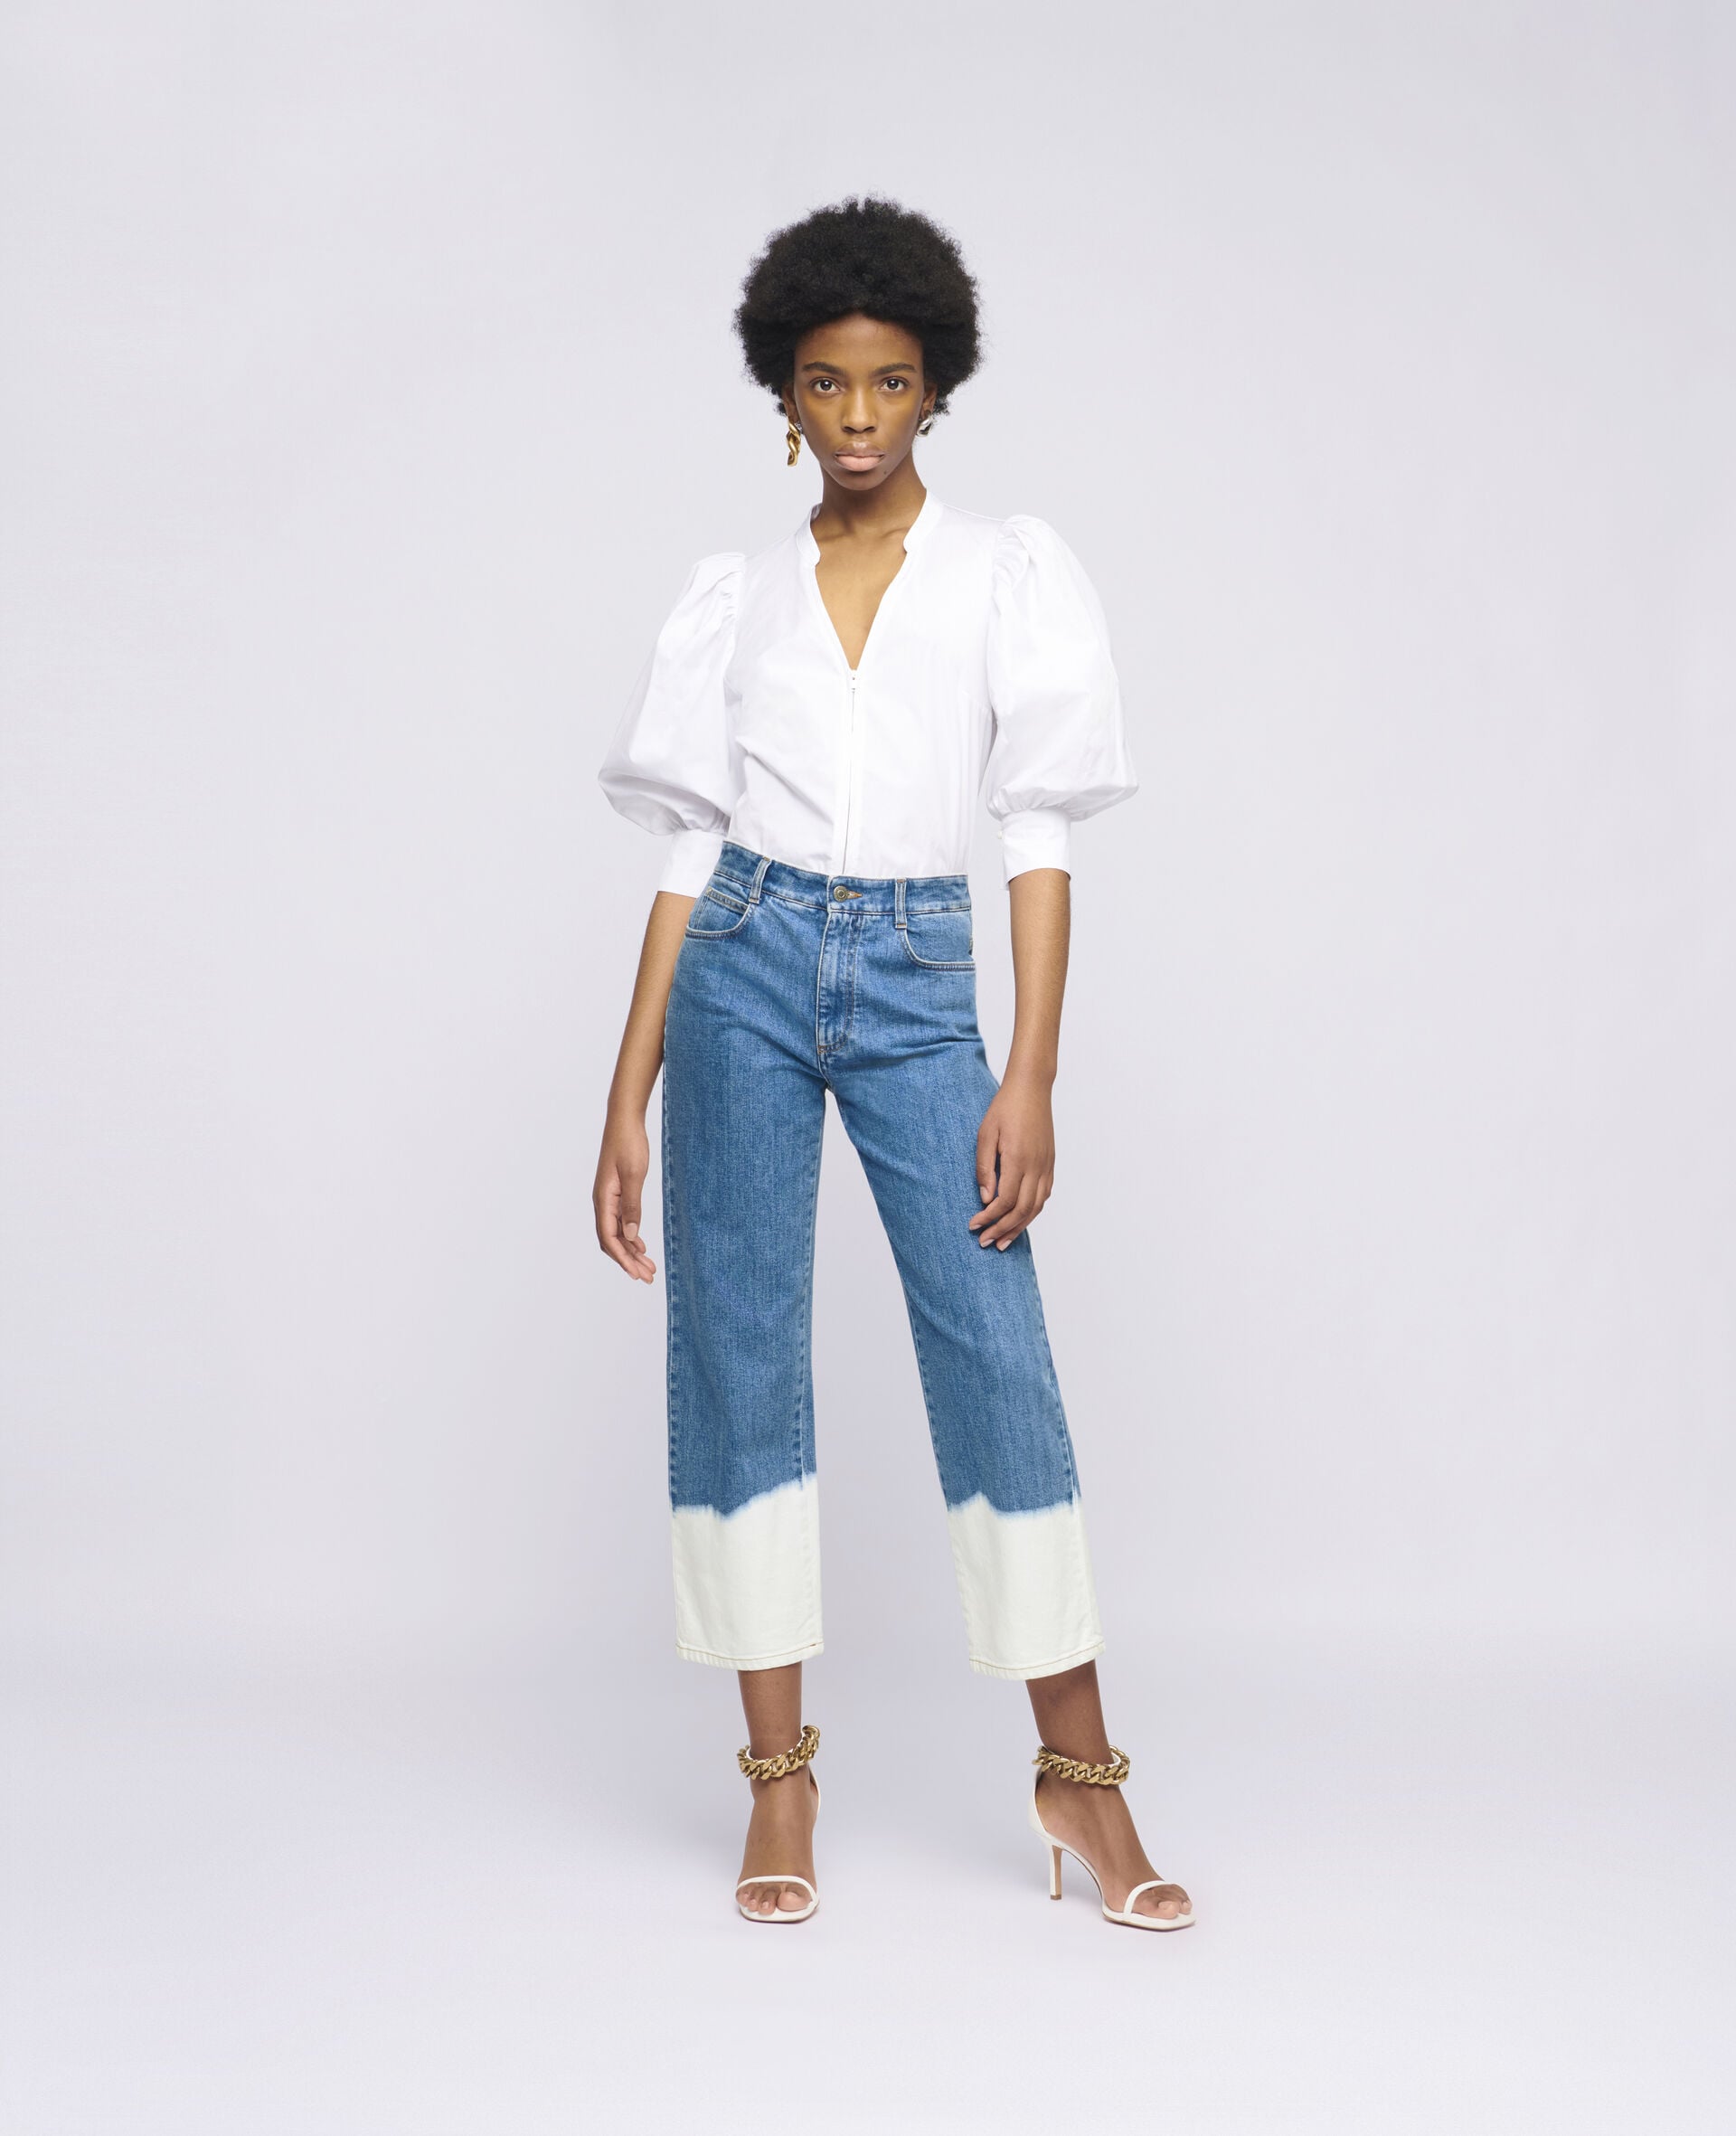 H&M x Lee sustainable denim collection, reviewed | The Independent